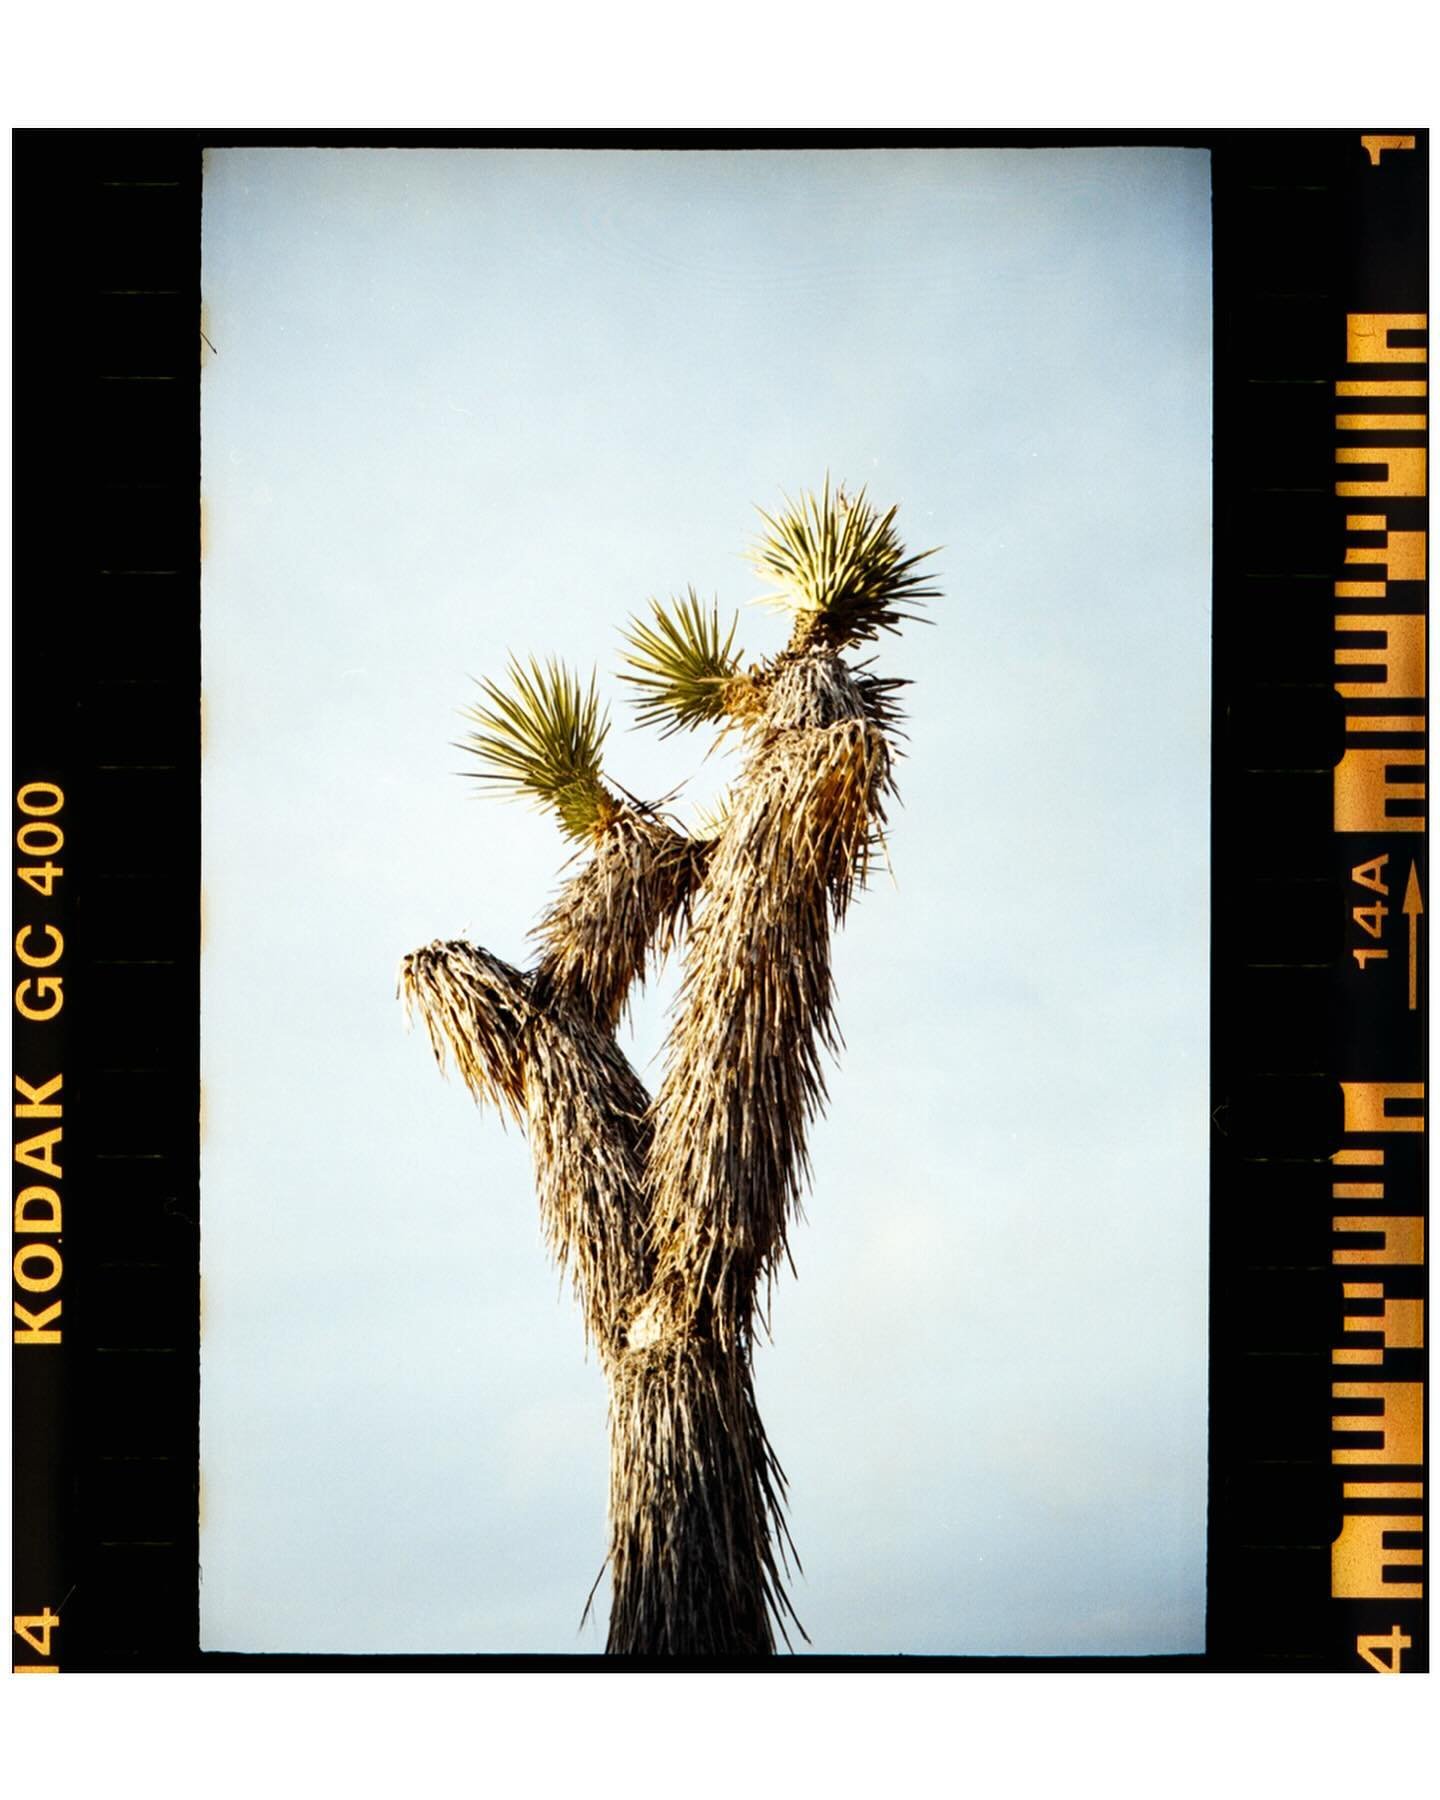 I loved the desert landscape of Joshua Tree. I kept feeling like I&rsquo;d been dropped into a movie set &ndash; all of the secret flat gathering places for lizards and small little cactus plants. They just felt like they had been made by a movie cre